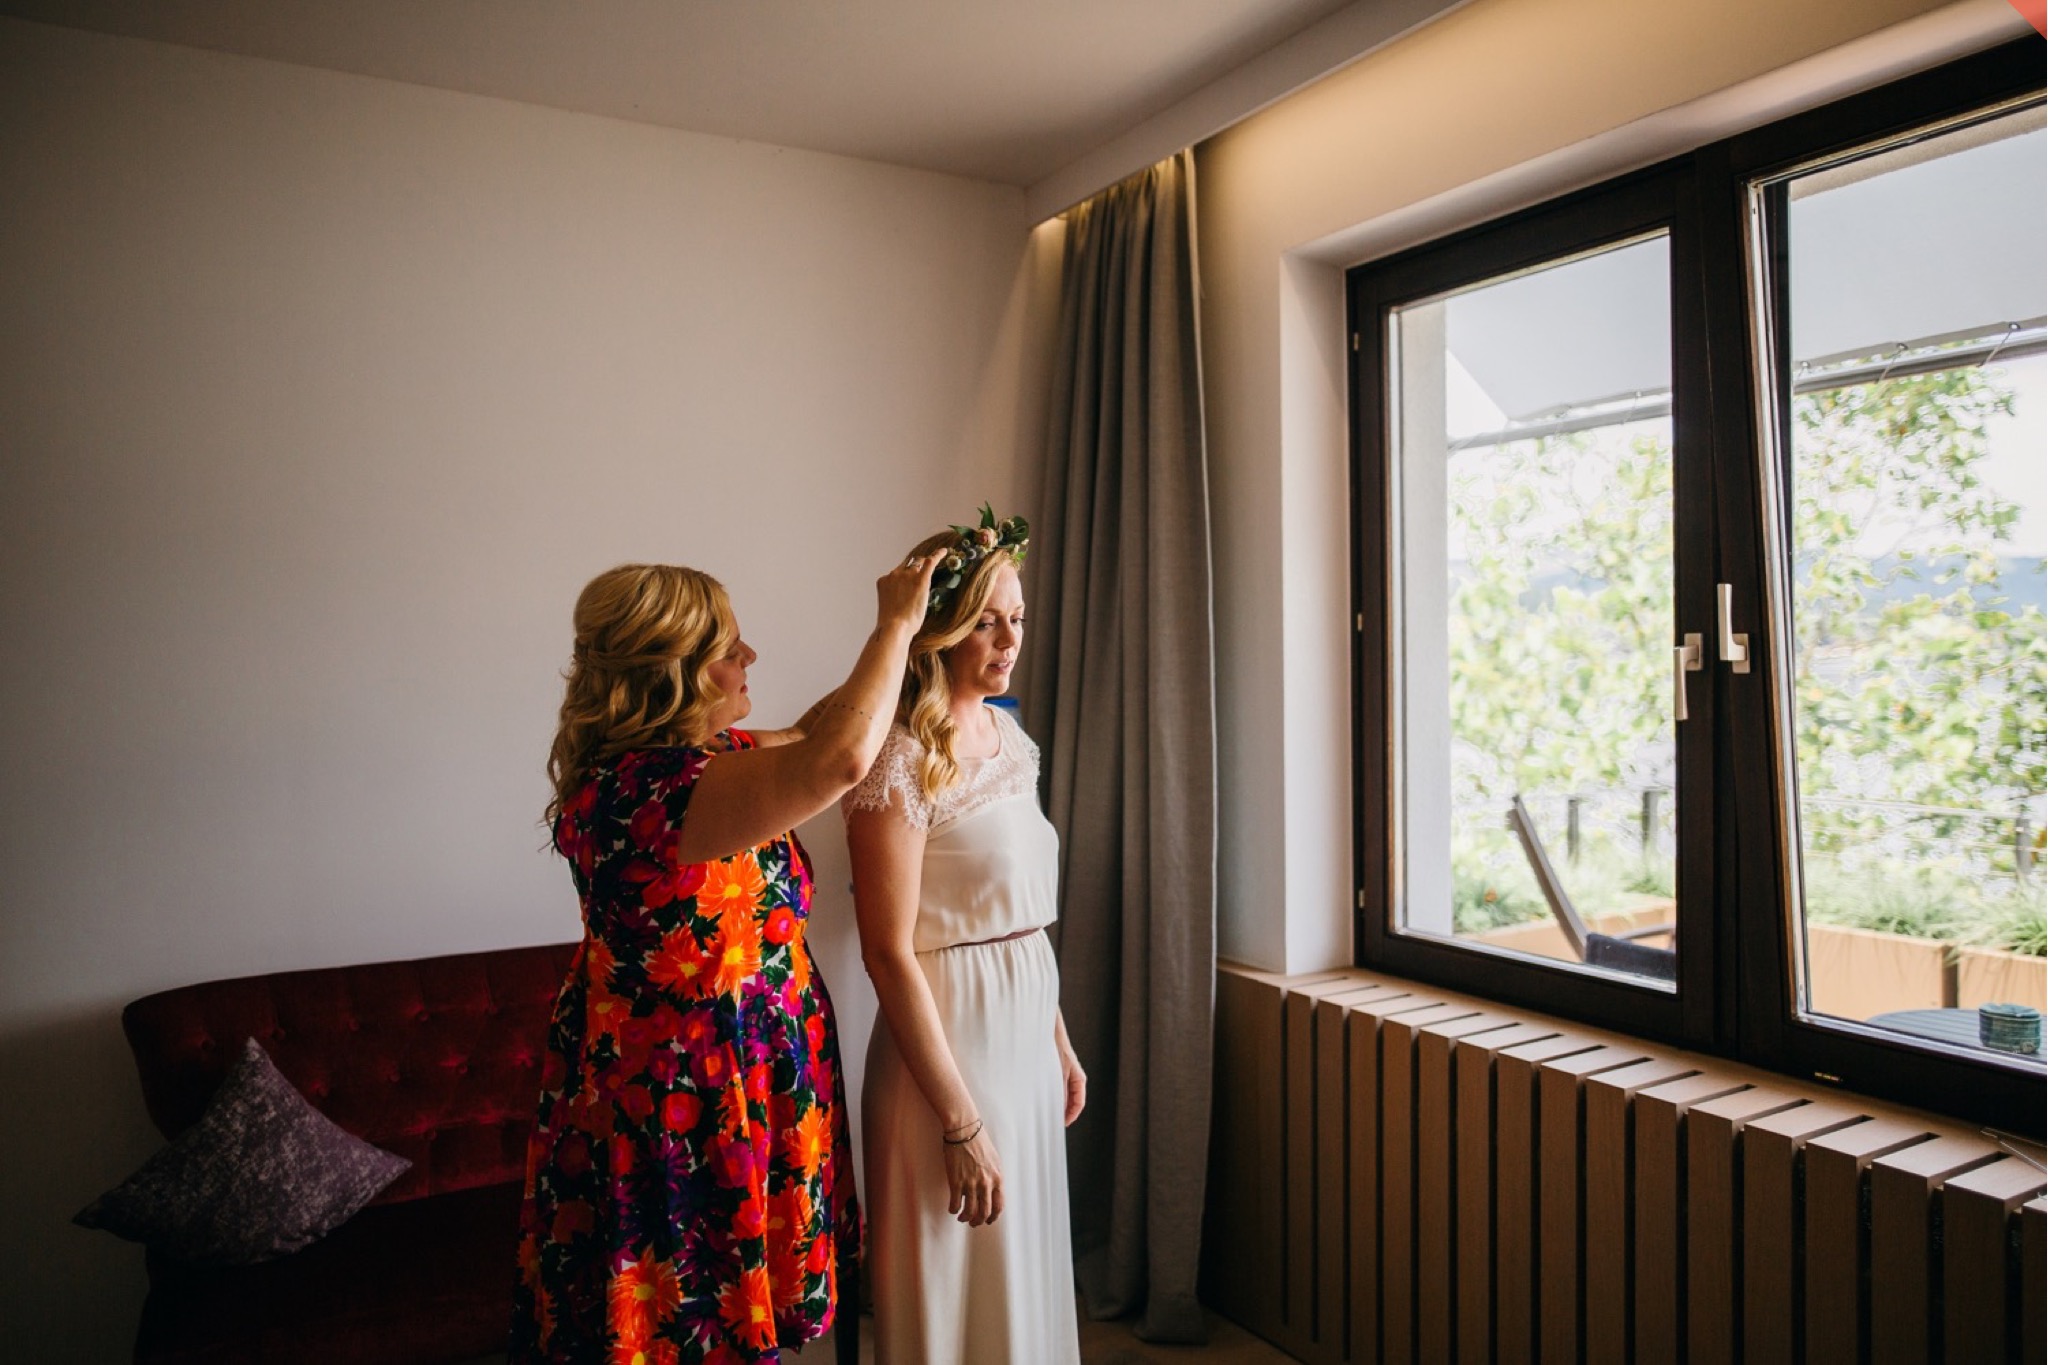 The bride gets help with her flower crown as she gets ready in her hotel room.